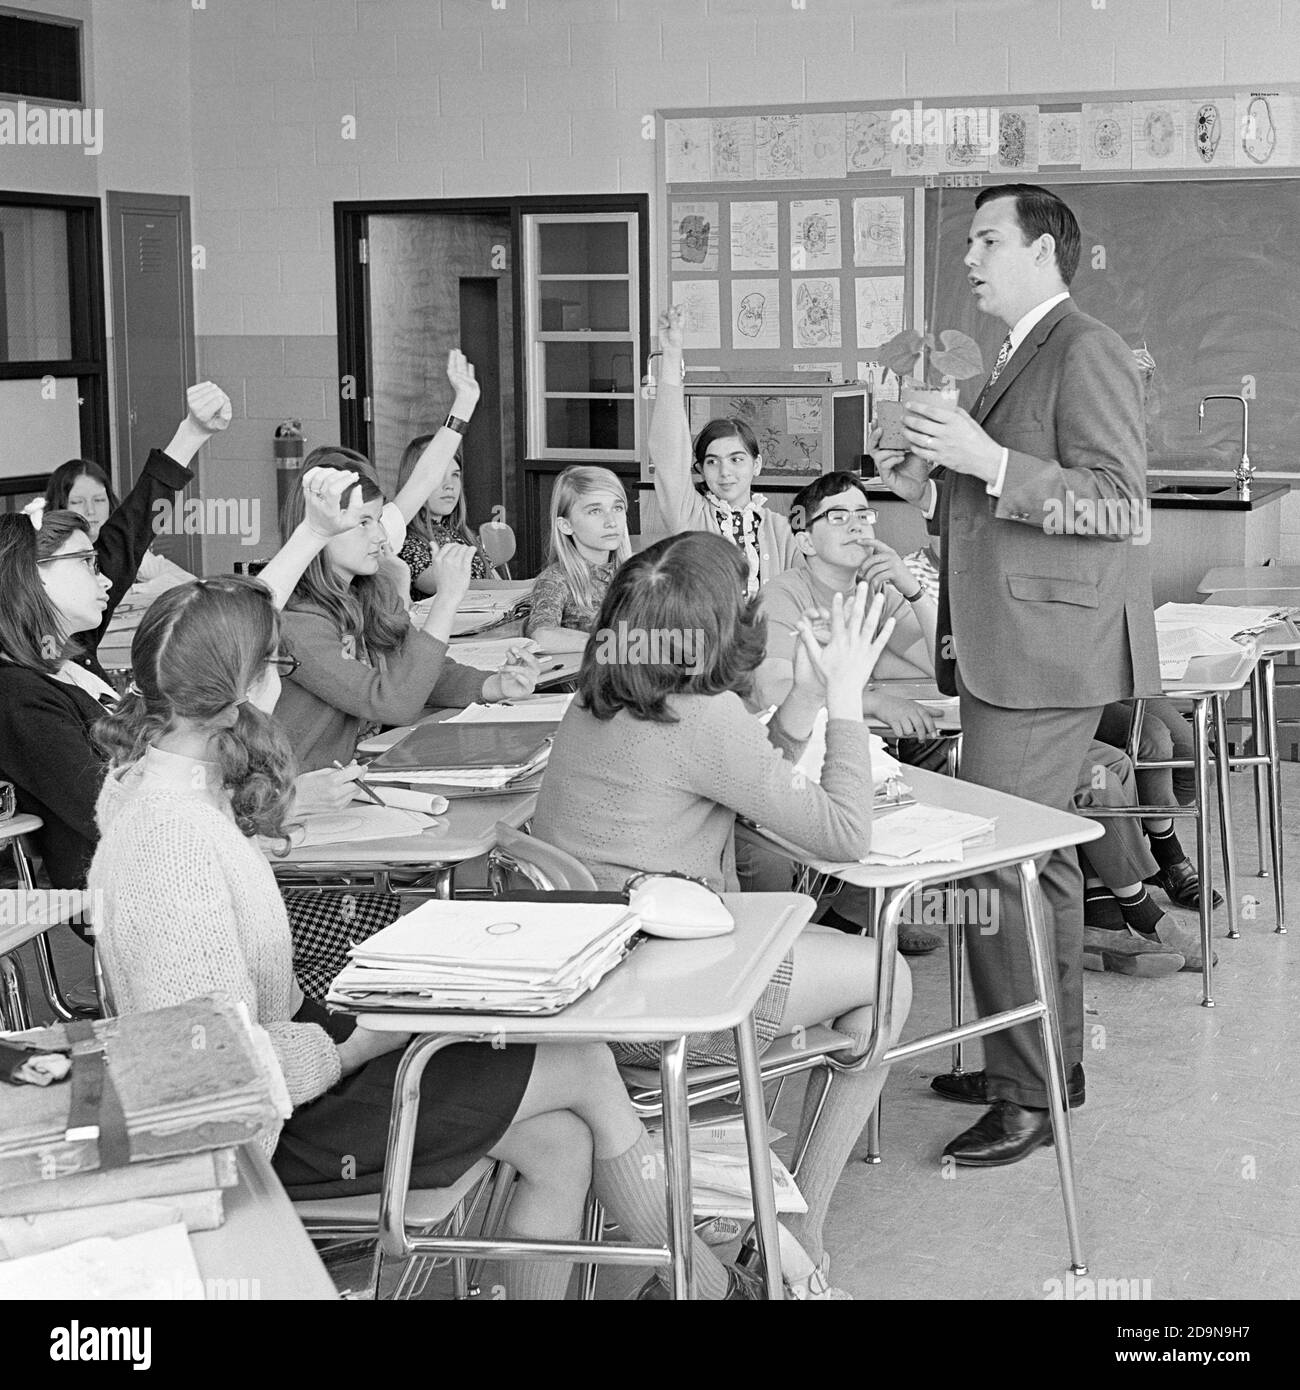 1960s MAN TEACHER ASKING CLASS A QUESTION FOUR STUDENTS RAISING HANDS TO ANSWER - s17971 KRU001 HARS LIFESTYLE SATISFACTION FEMALES COPY SPACE FULL-LENGTH ASKING PERSONS INSPIRATION MALES TEENAGE GIRL TEENAGE BOY RAISING B&W DESKS GOALS SCHOOLS DISCOVERY STRATEGY INSTRUCTOR KNOWLEDGE QUESTION HIGH SCHOOL OCCUPATIONS HIGH SCHOOLS CONNECTION ANSWER EDUCATOR TEENAGED COOPERATION EDUCATING EDUCATORS GROWTH INSTRUCTORS JUVENILES MID-ADULT MAN MIDDLE SCHOOL SCHOOL TEACHES BLACK AND WHITE CAUCASIAN ETHNICITY OLD FASHIONED Stock Photo